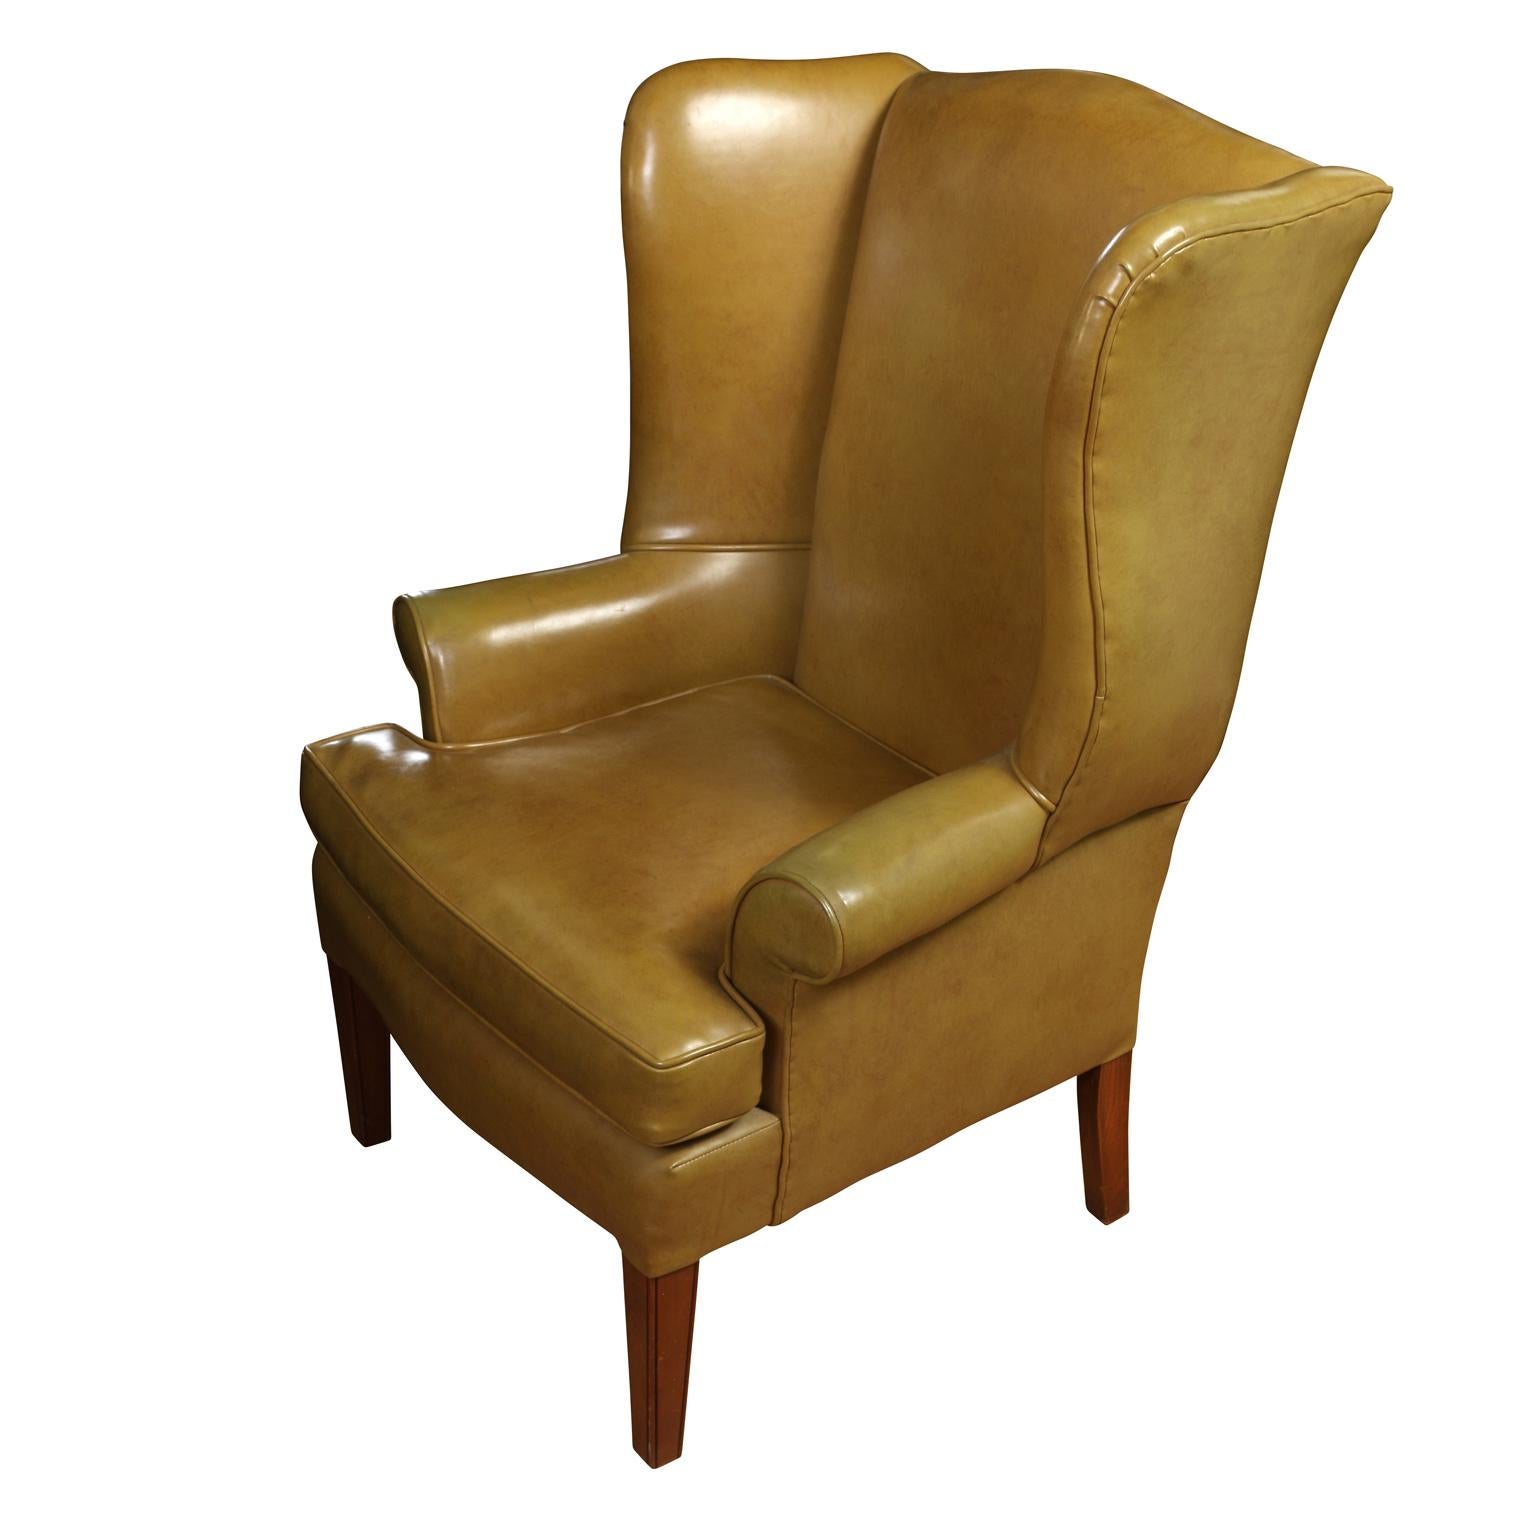 A vintage wingback chair in a natural leather look upholstery on straight legs